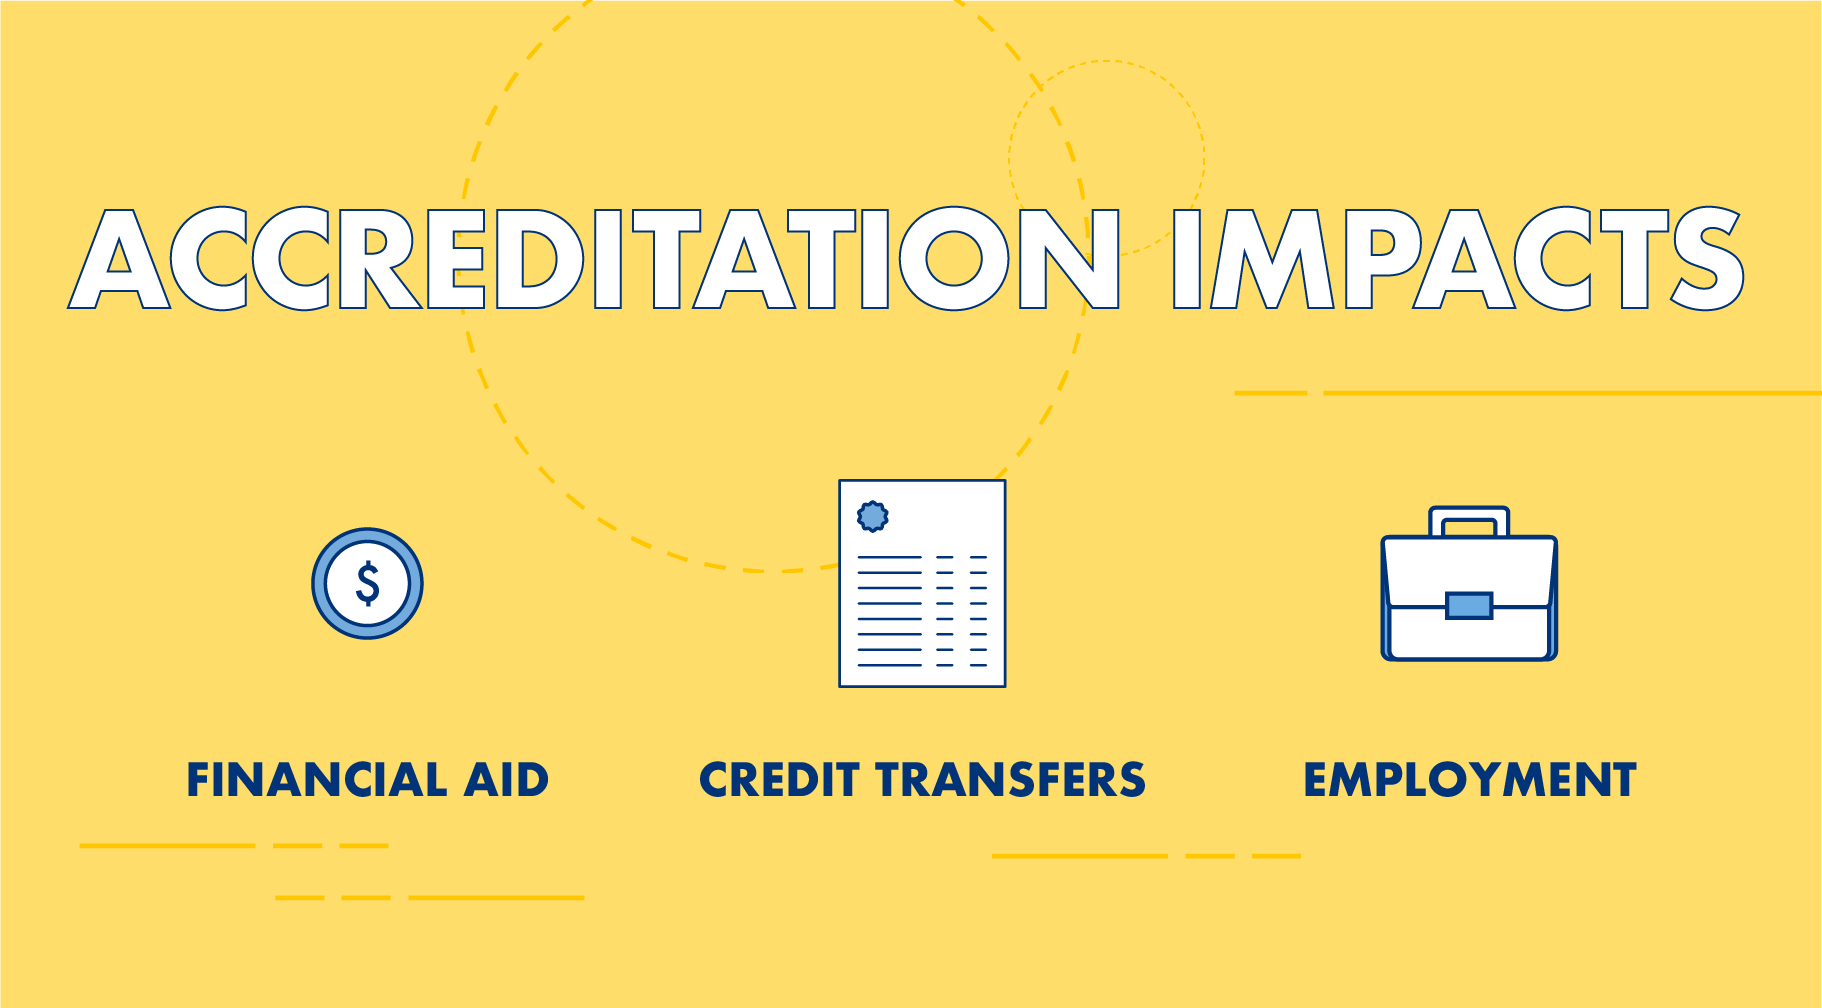 Impacts on accreditation – financial aid, credit transfer and employment